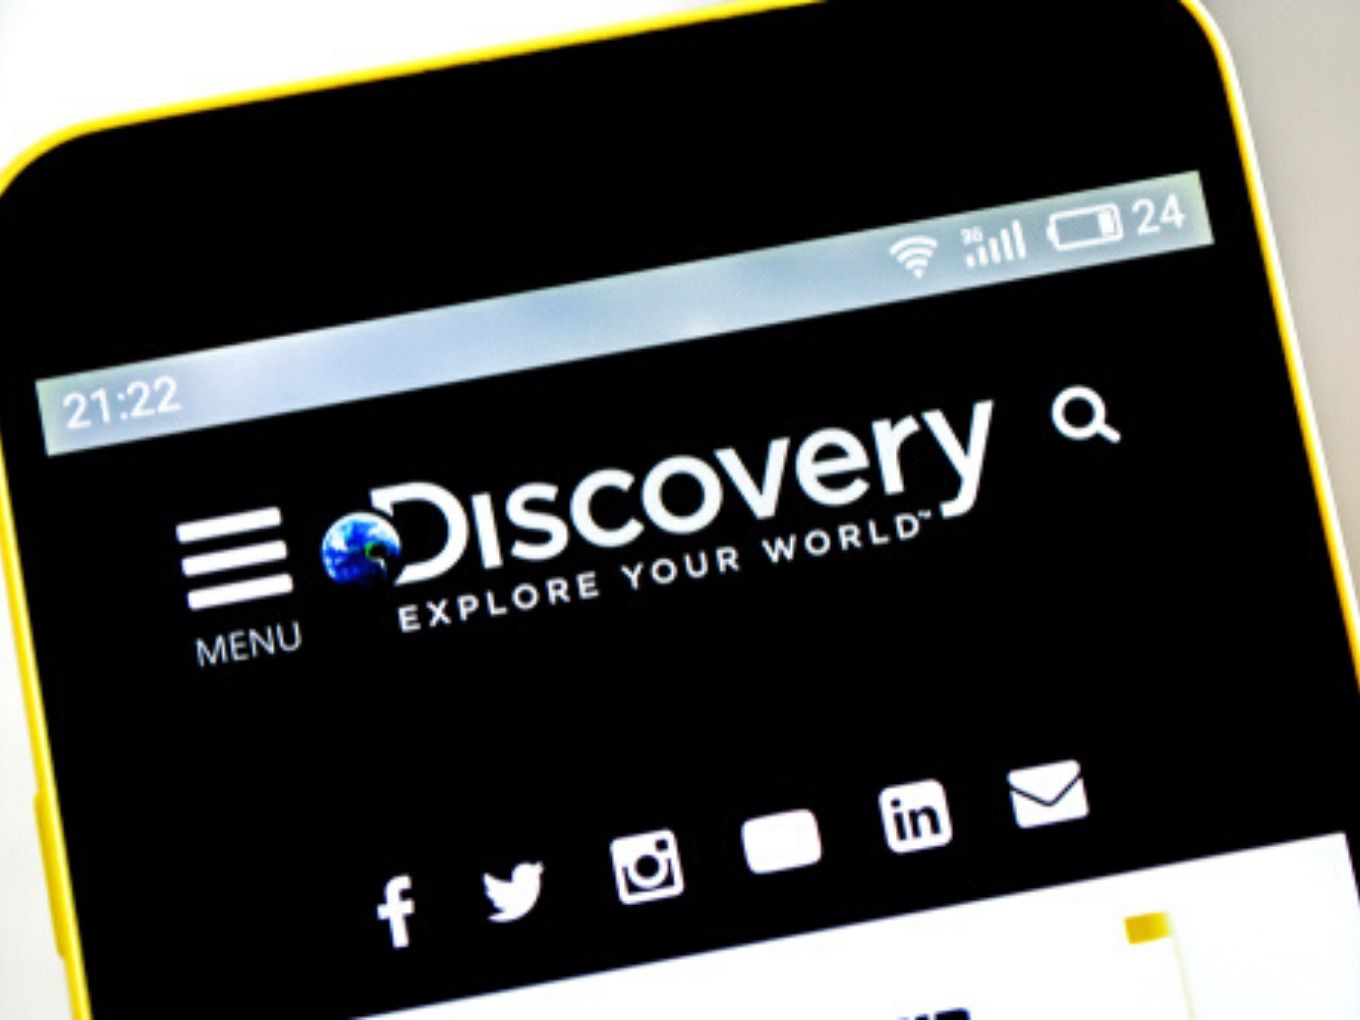 Discovery Targets Online Infotainment Niche With Launch Of OTT Service